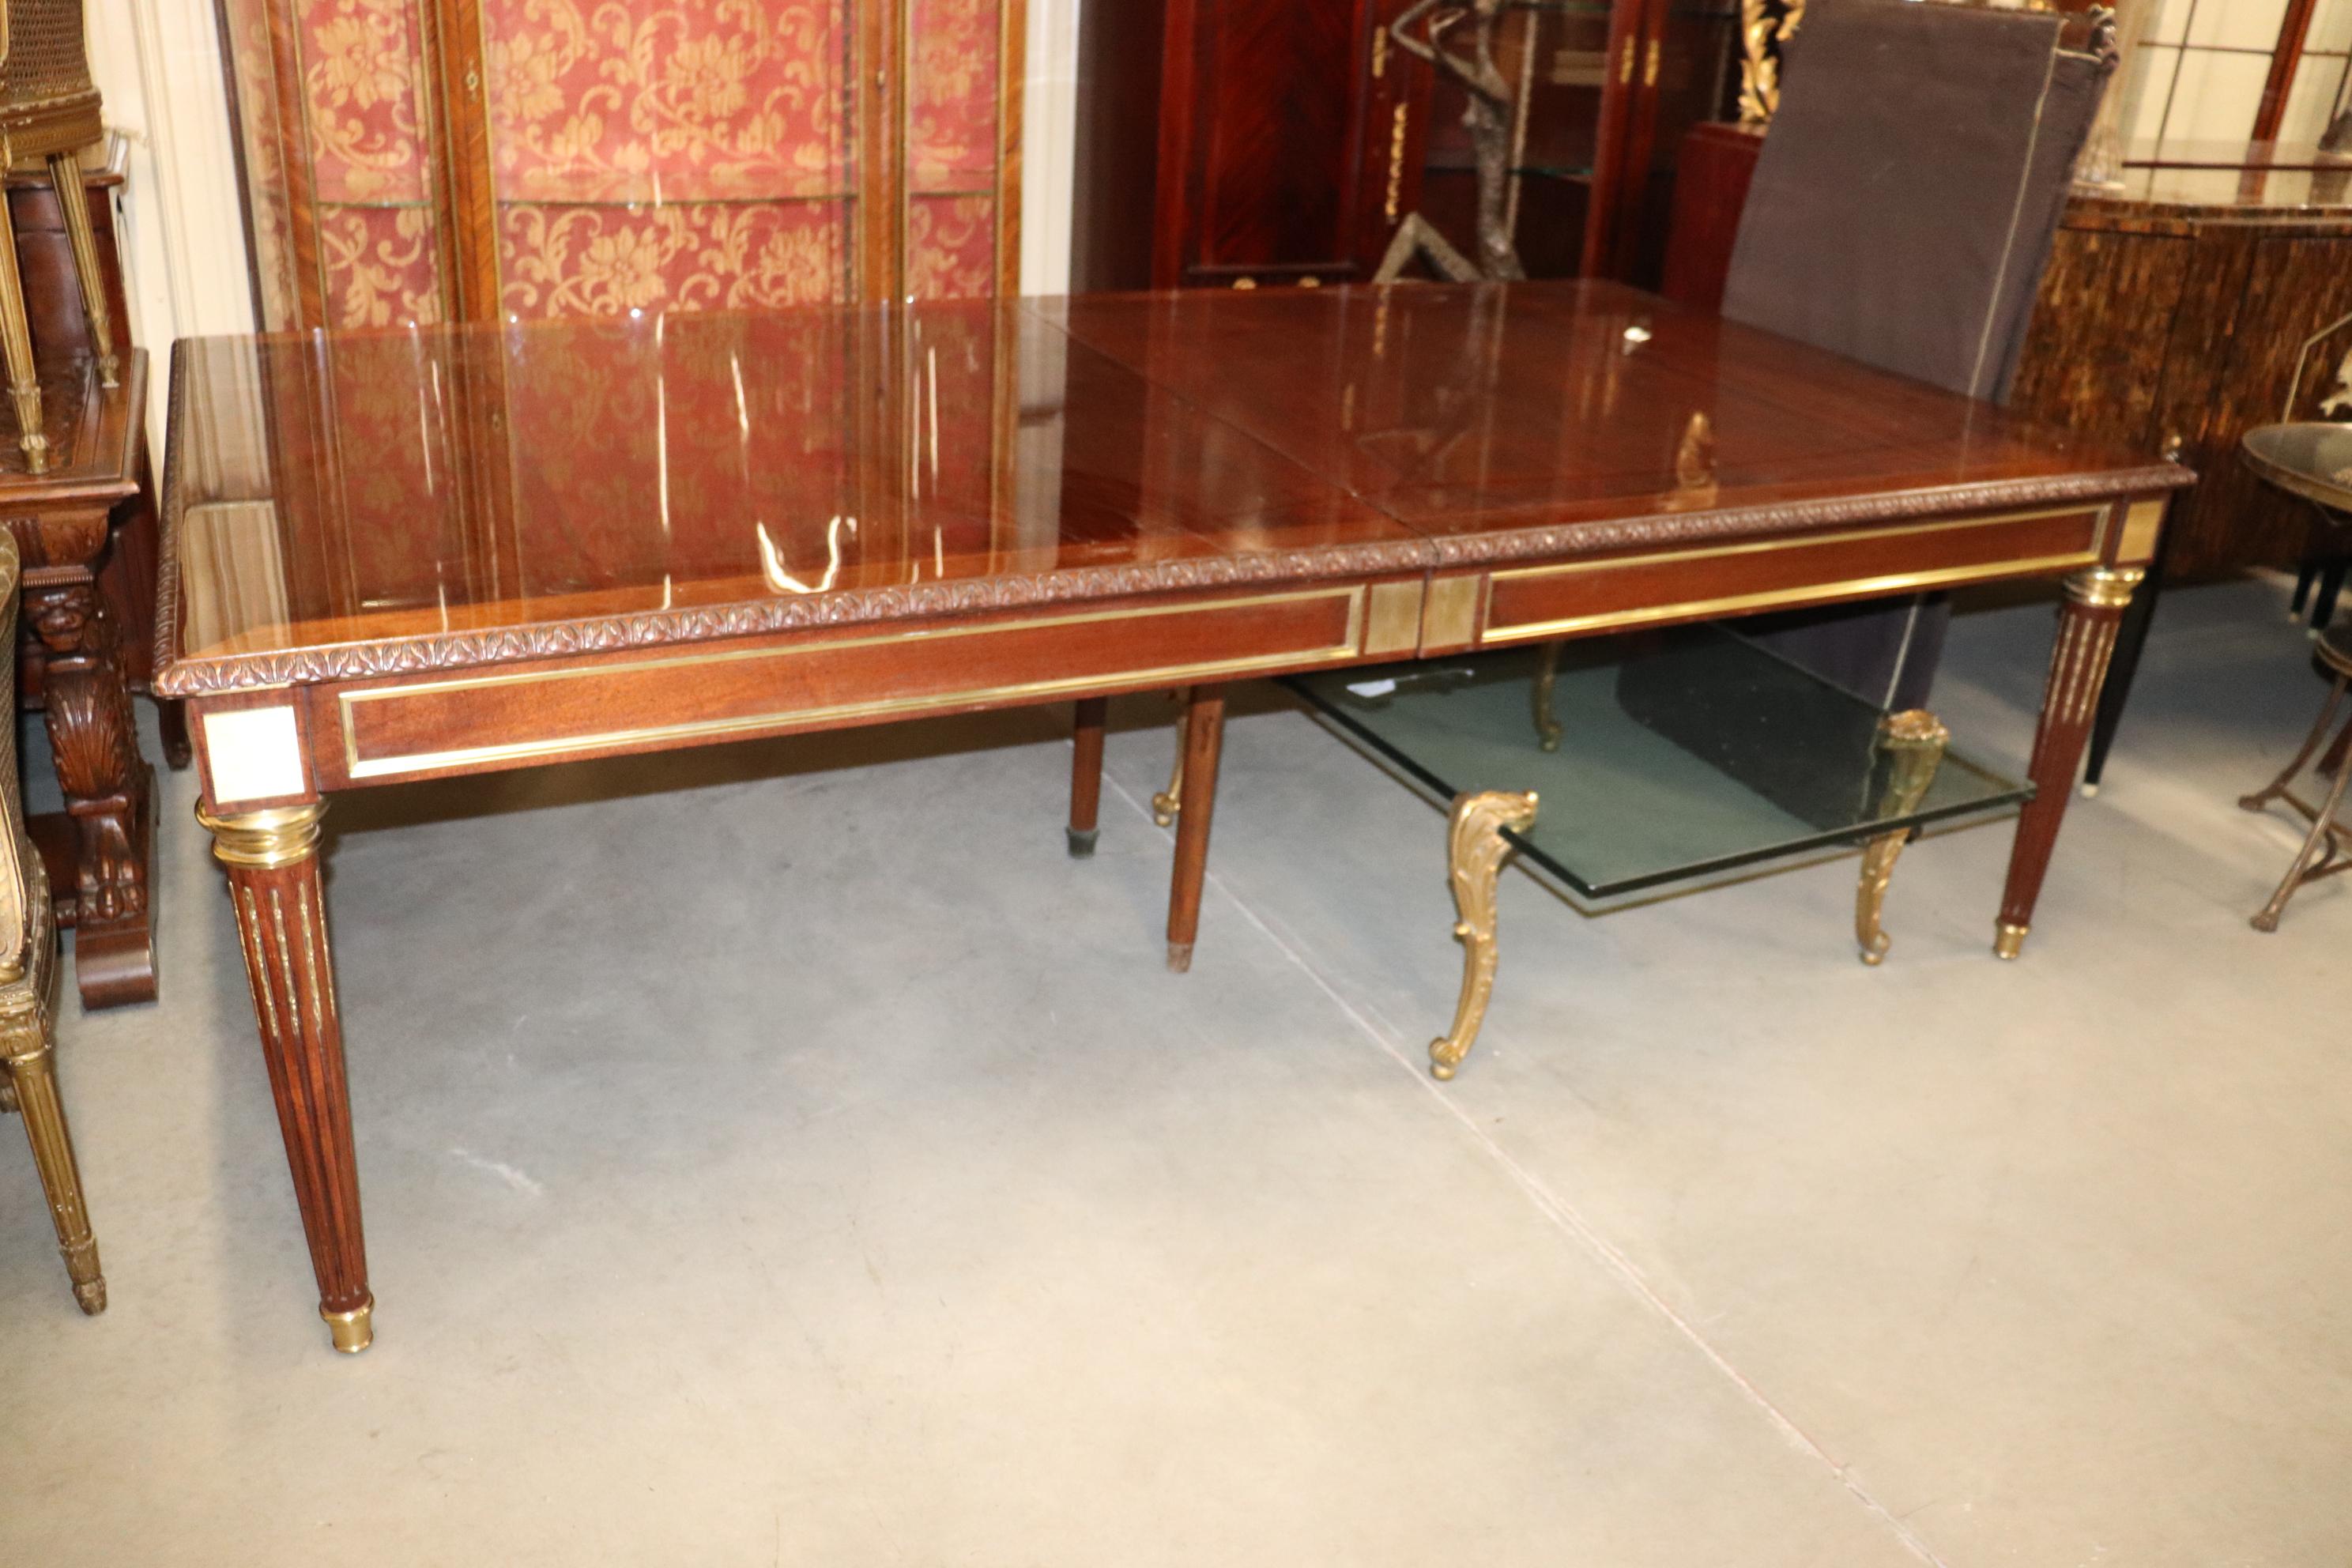 This is a fine quality solid mahogany and polished bronze carved dining table in the Louis XV style. The table is in very good condition but will have fine scuffs and scratches on top from use but nothing obtrusive or very noticeable. You'll be